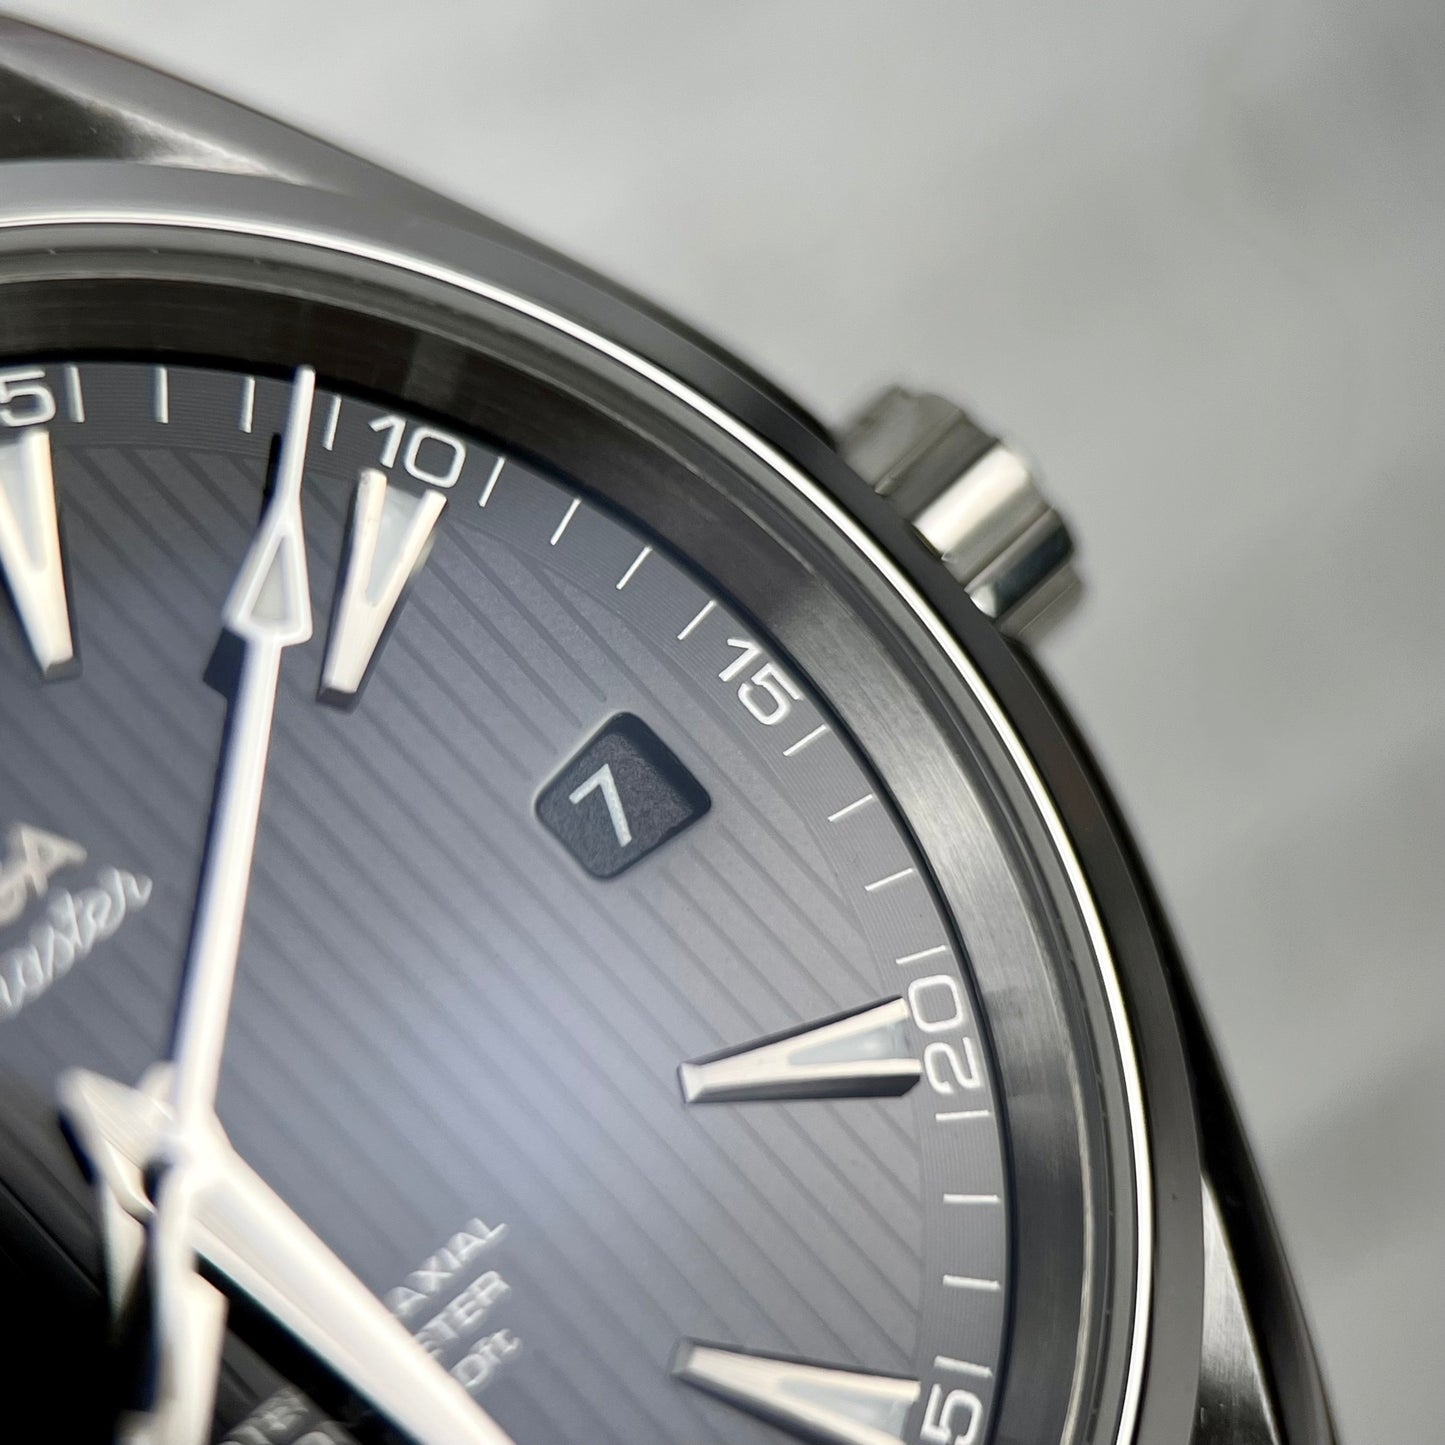 Omega Seamaster 220.10.41.21.01.001 1:1 Best Edition VS Factory Black Dial newest version